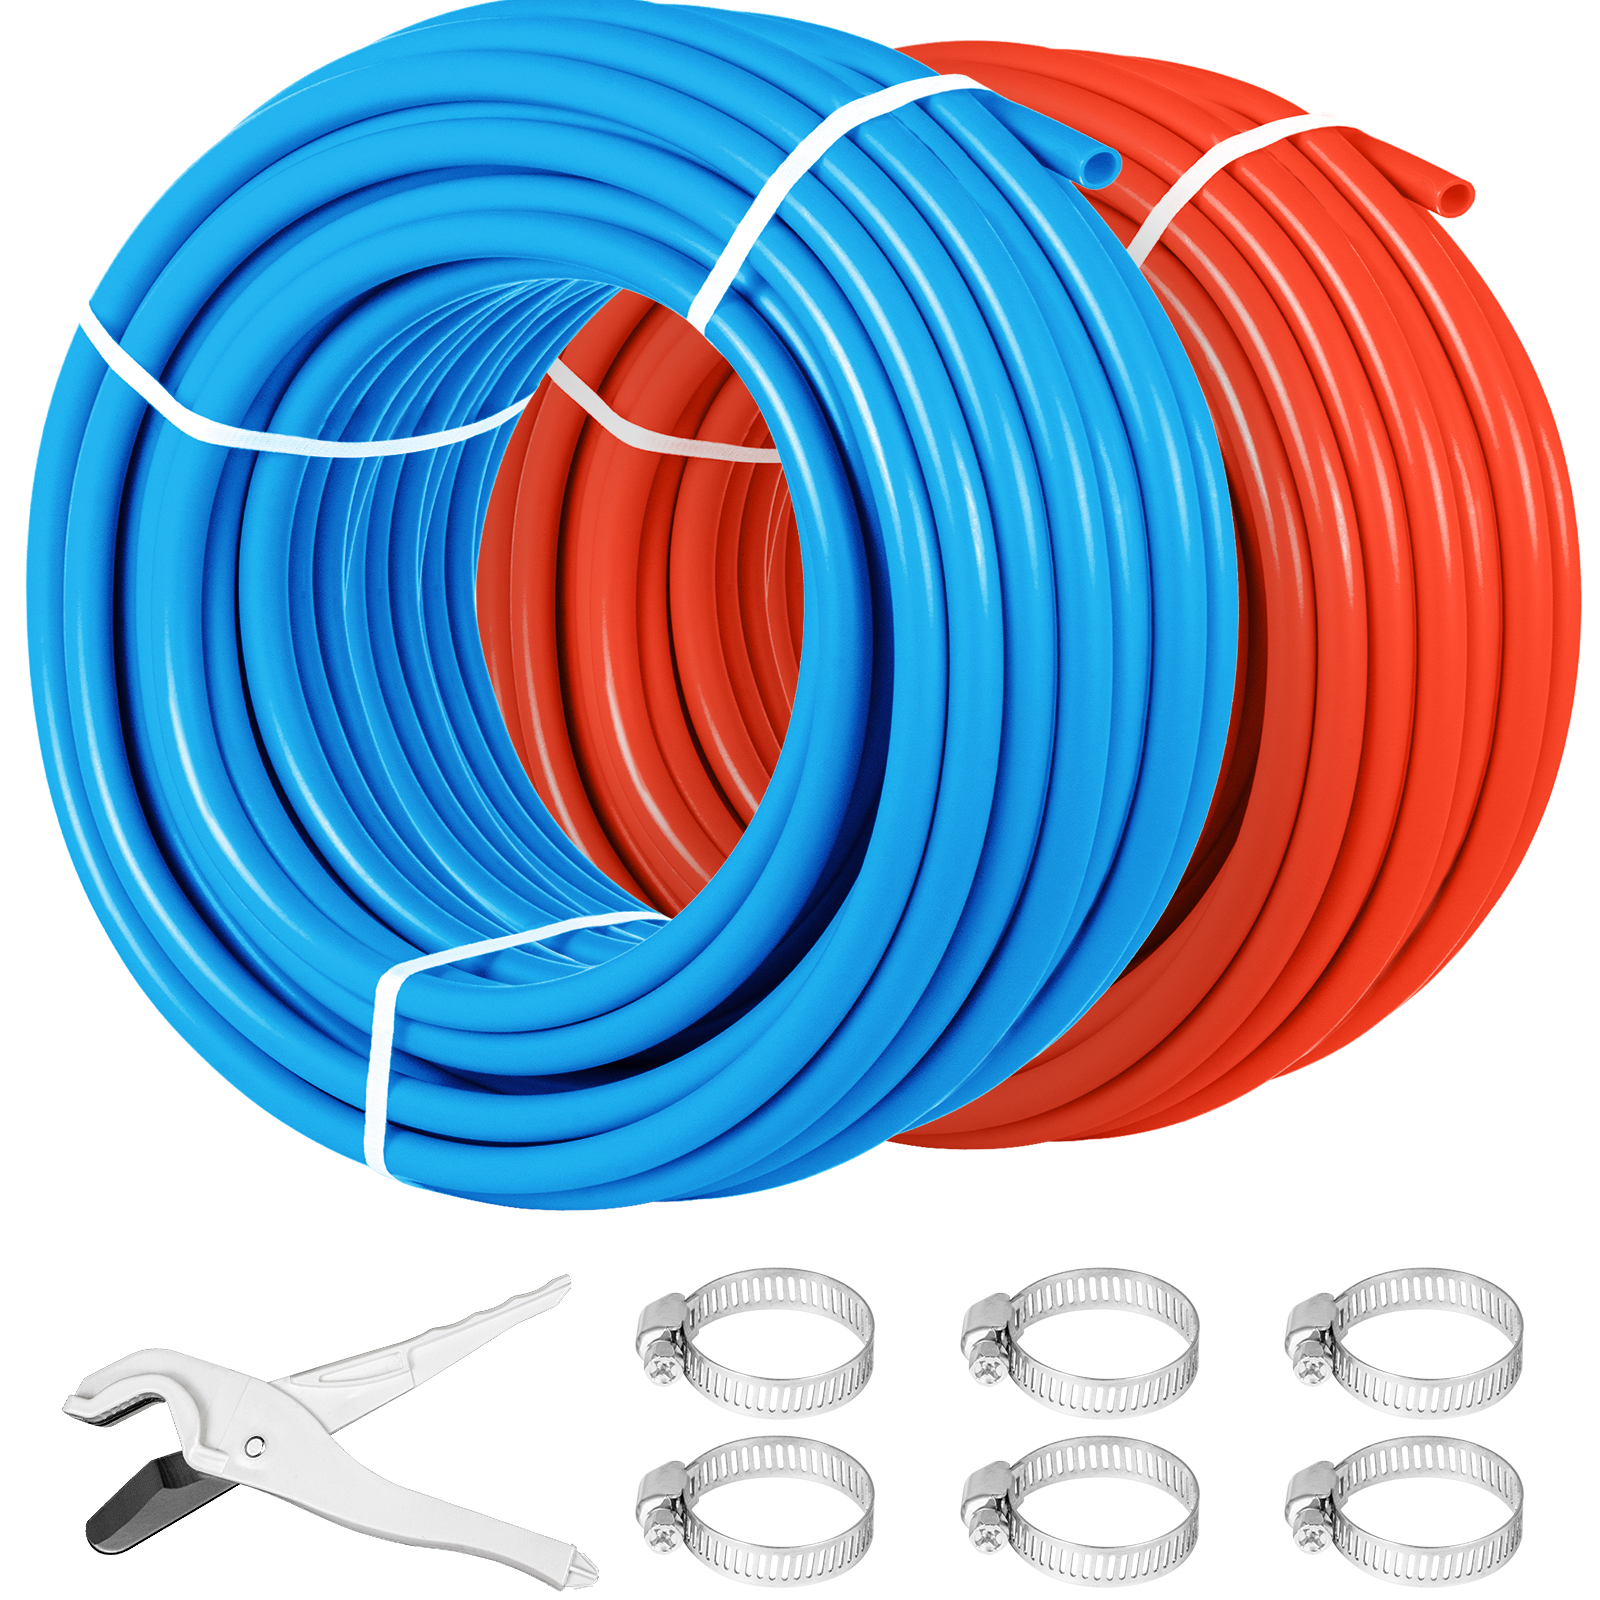 1/2" Oxygen Barrier Pex Tubing 300' Red And 300' Blue For Water Plumbing Hq от Vevor Many GEOs